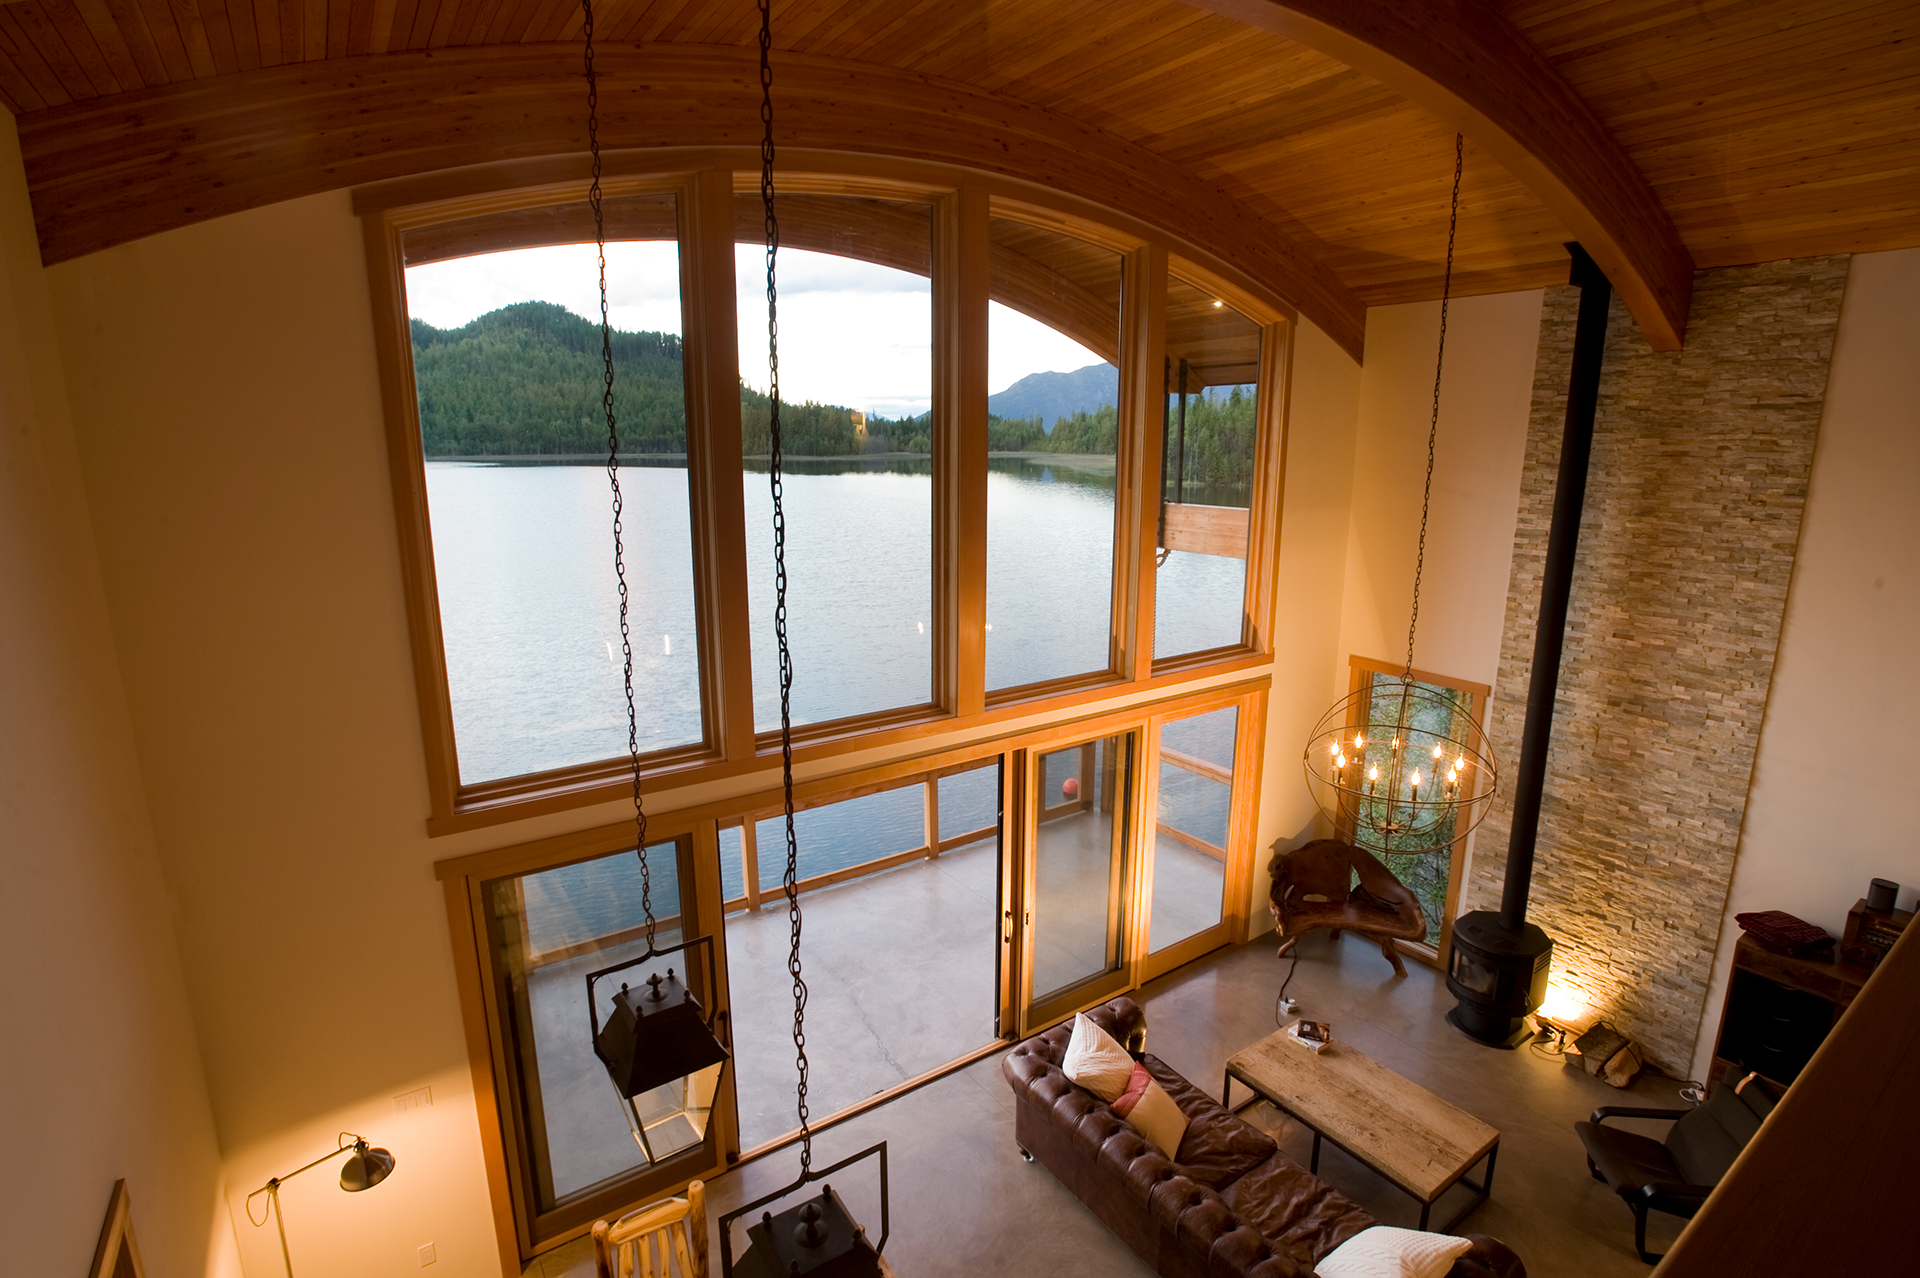 high ceiling of a contemporary home with curved roof